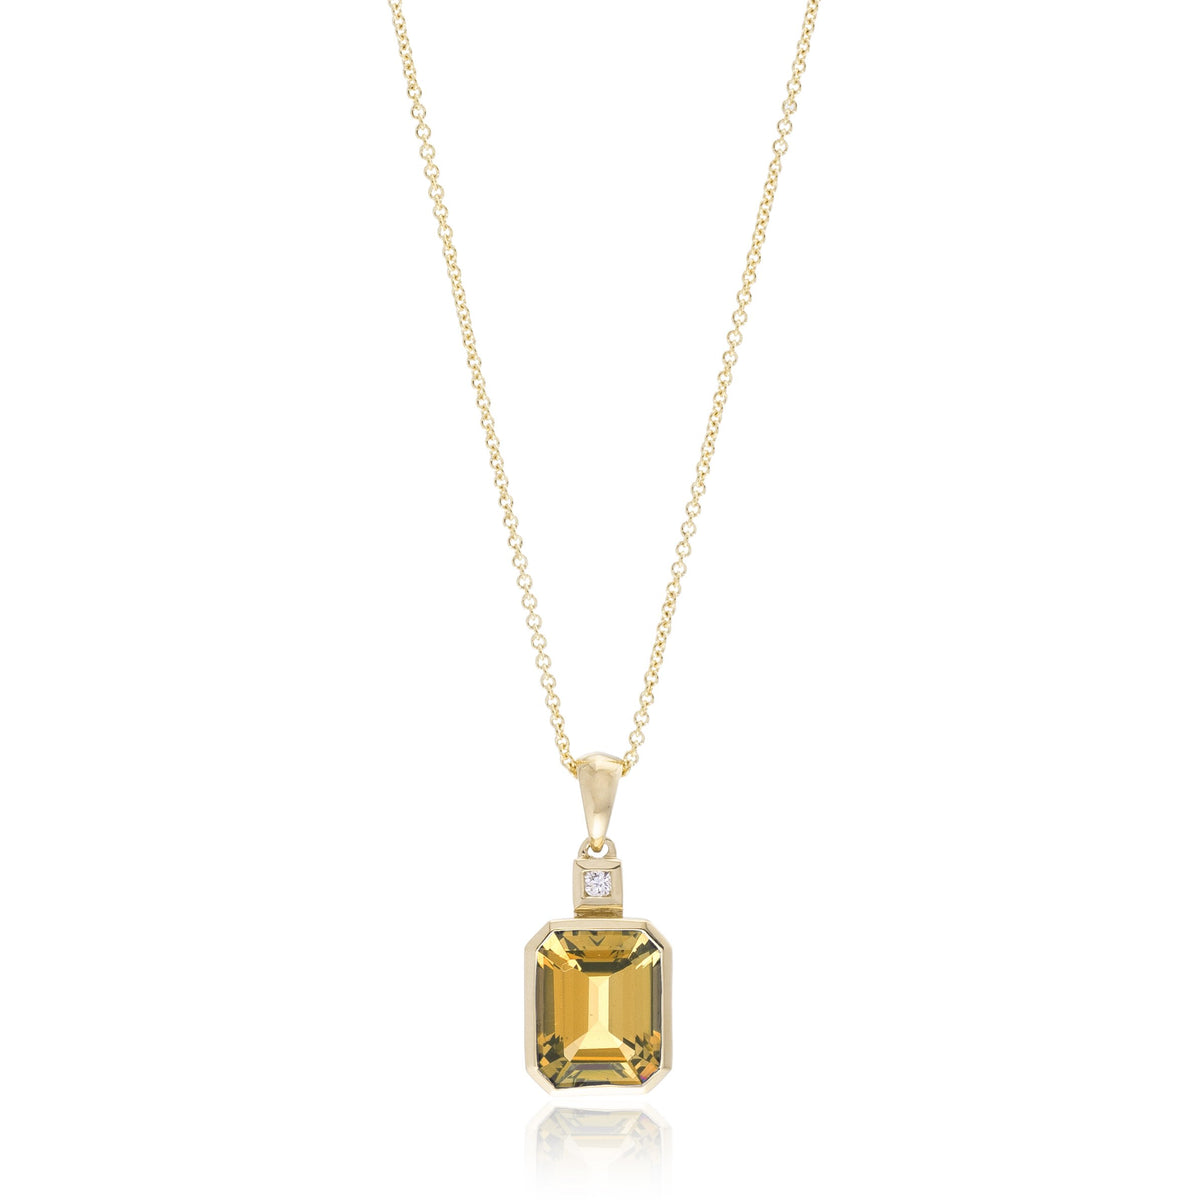 14K Yellow Gold Emerald Cut Citrine Necklace